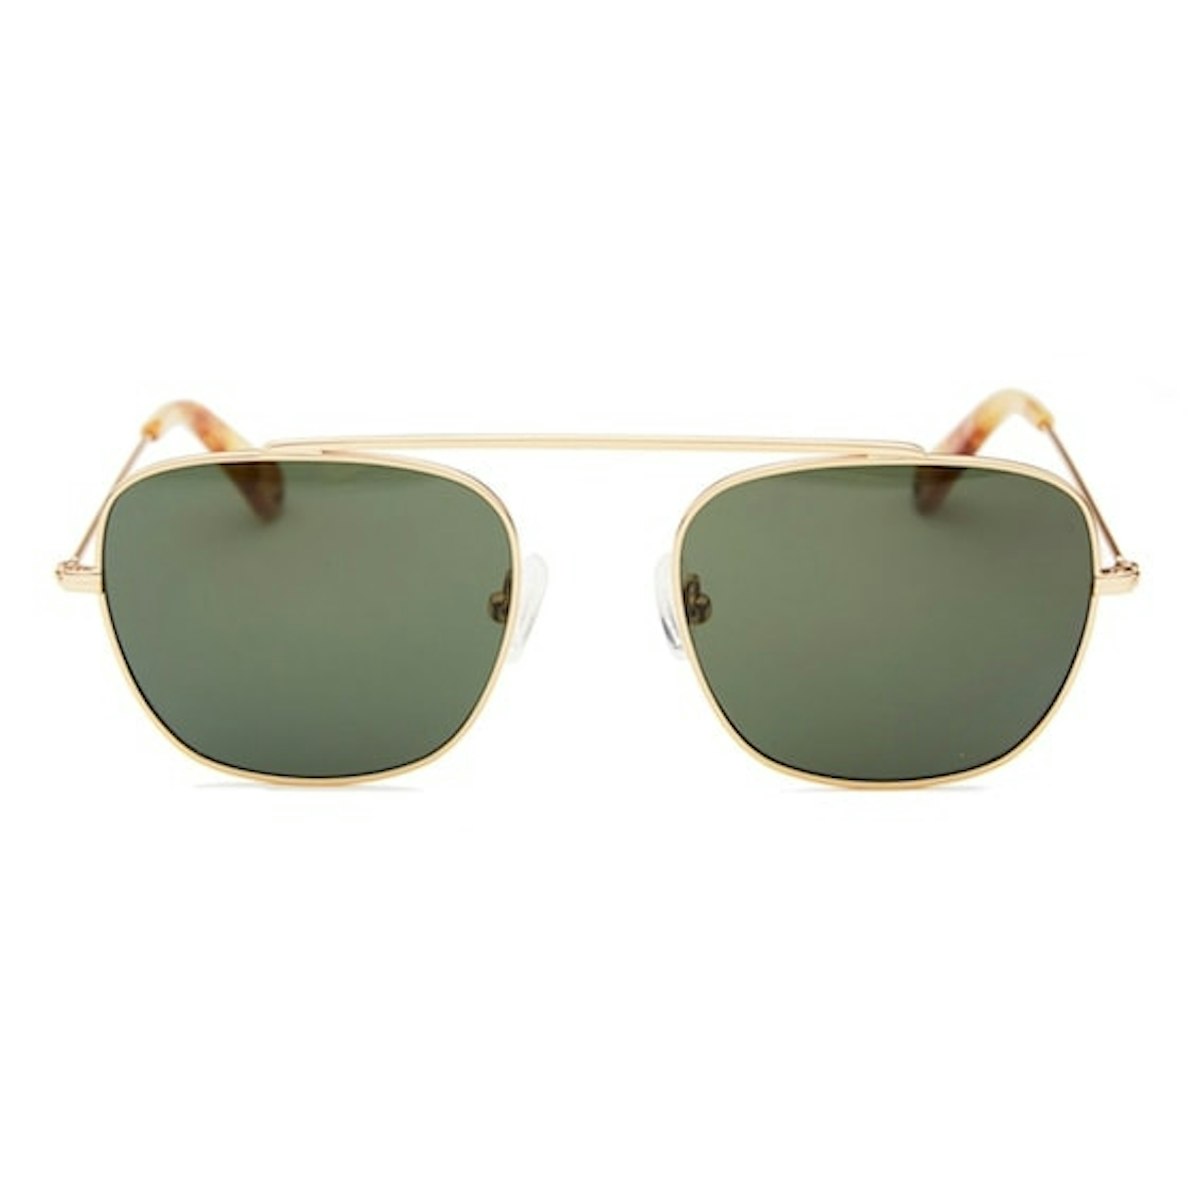 InStitchu Accessories sunglasses Pacifico Optical South Vintage Gold with Green Lens